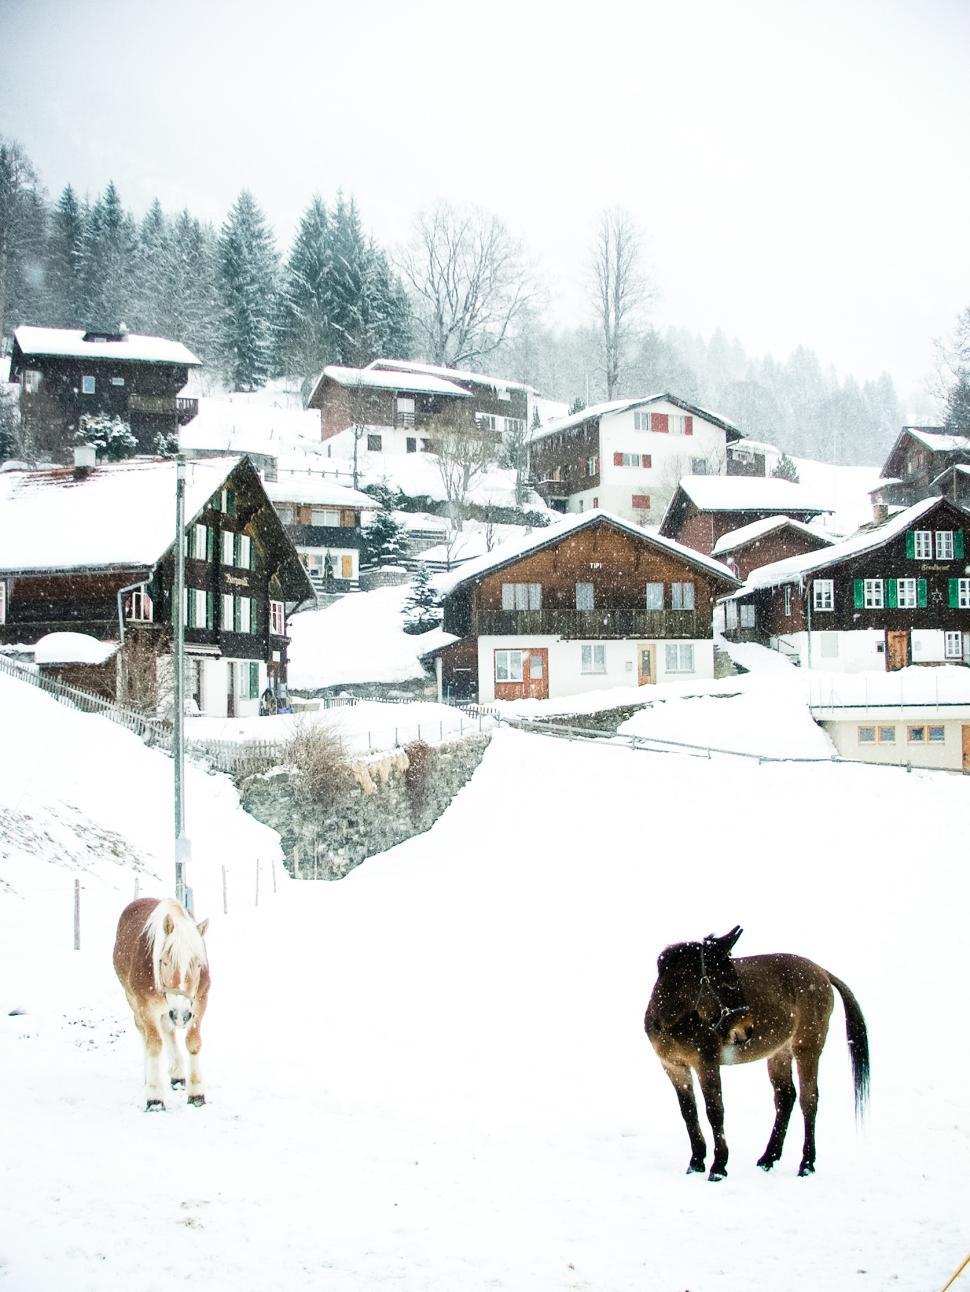 Free Image of Snowy village and horses 